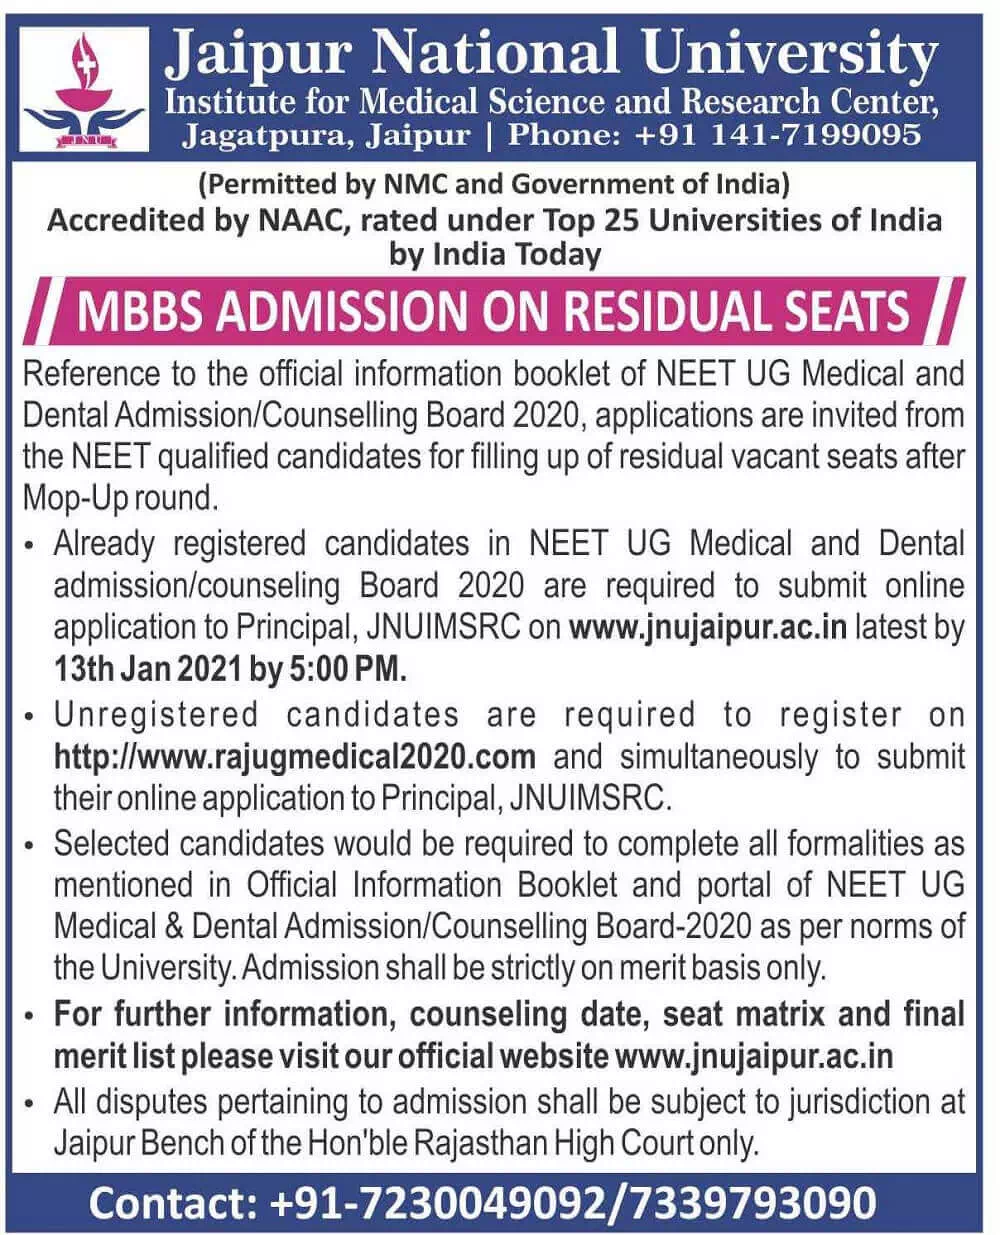 Admission in MBBS Programmes	